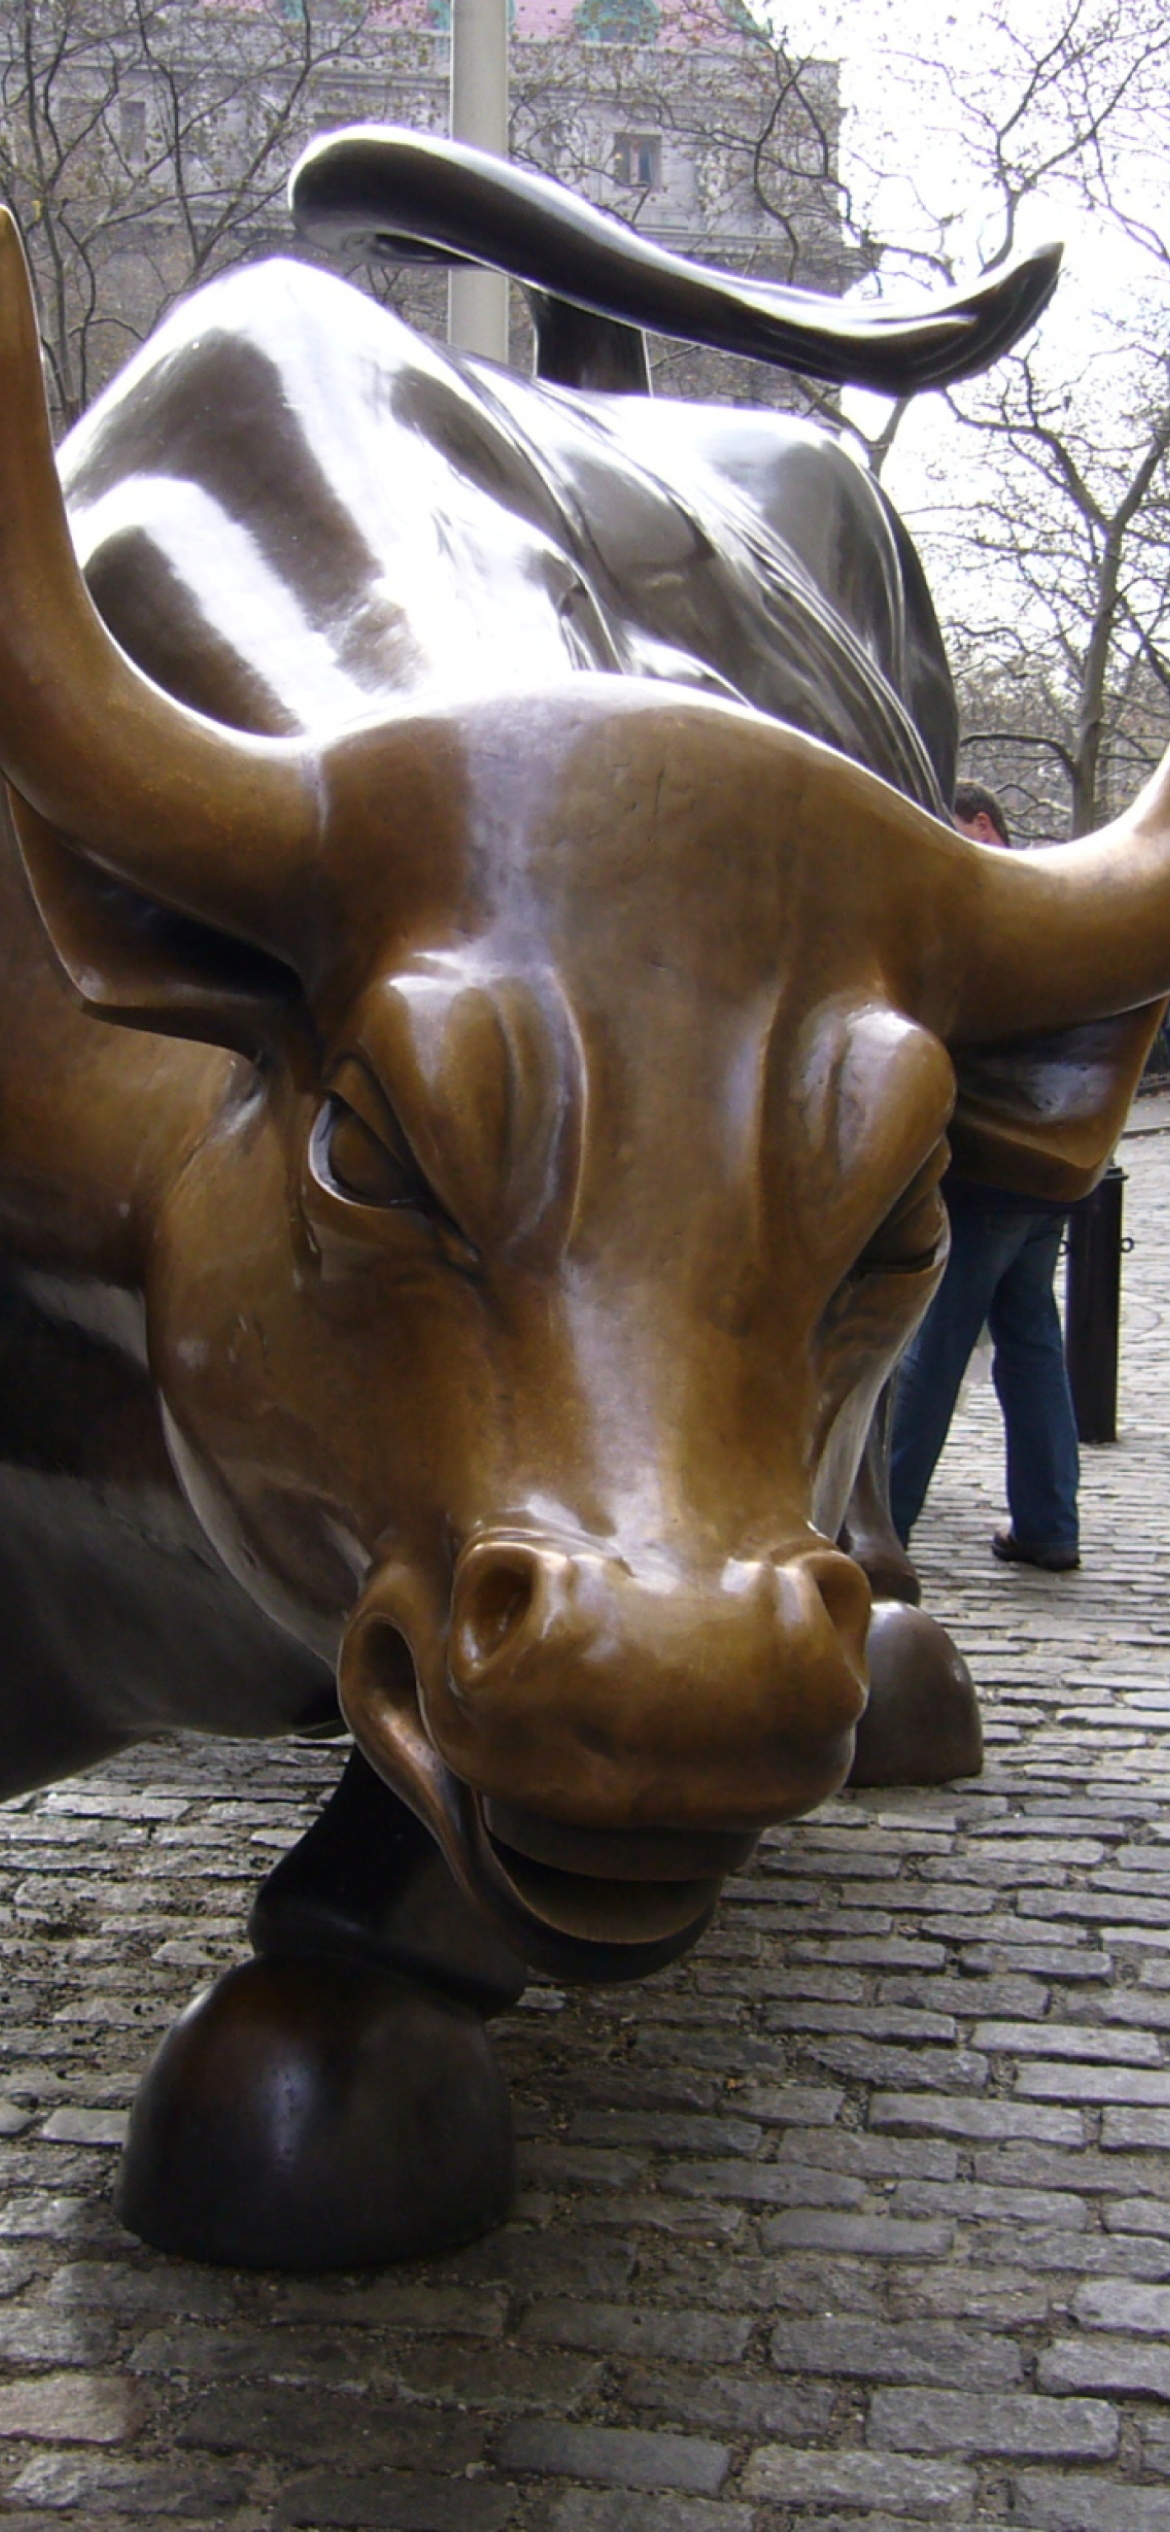 1170x2532 The Wall Street Bull Wallpaper for iPhone 12 Pr